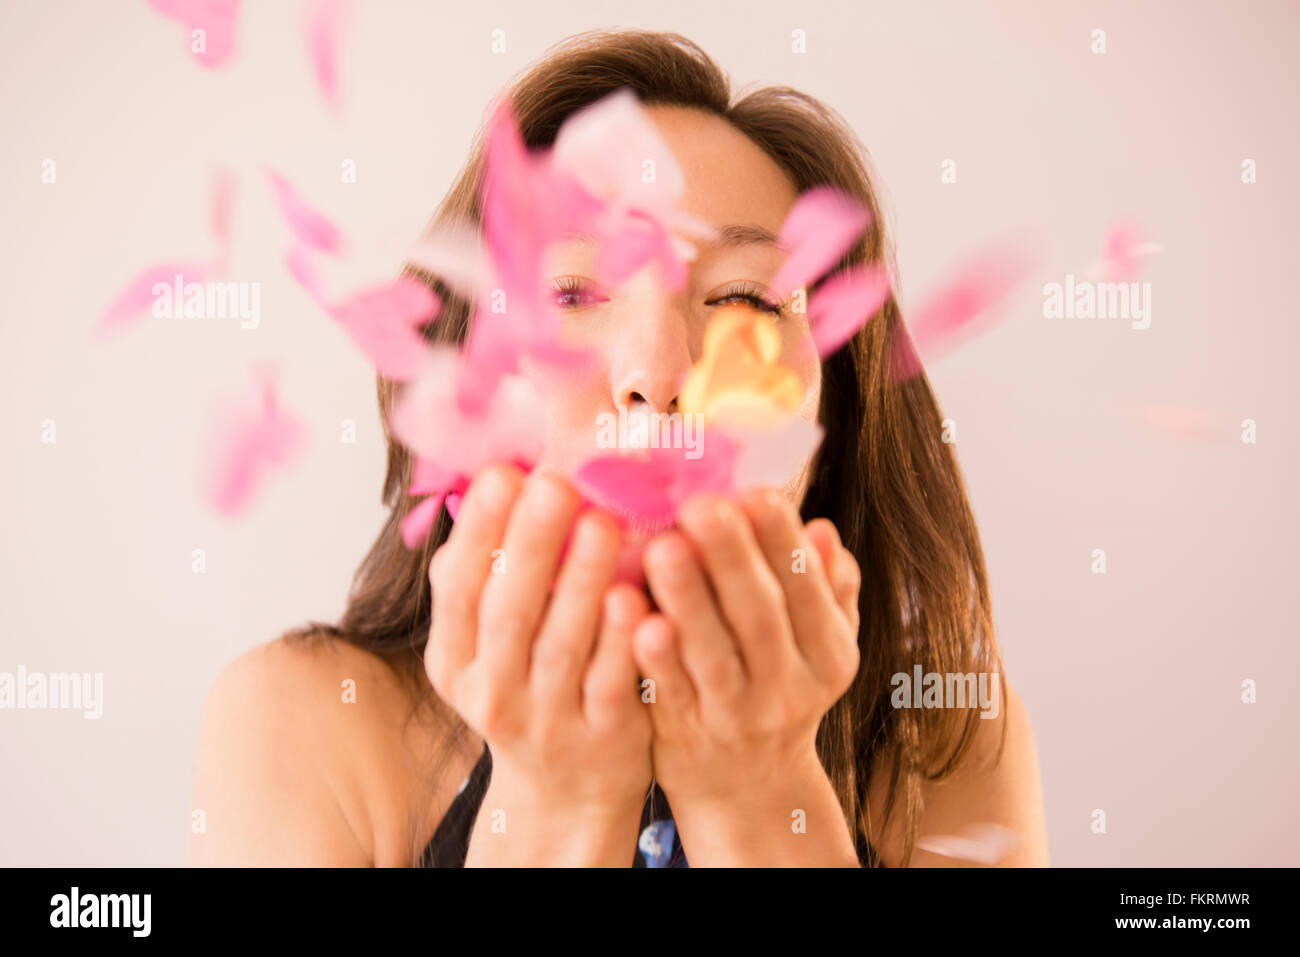 Mixed Race woman blowing confetti Banque D'Images